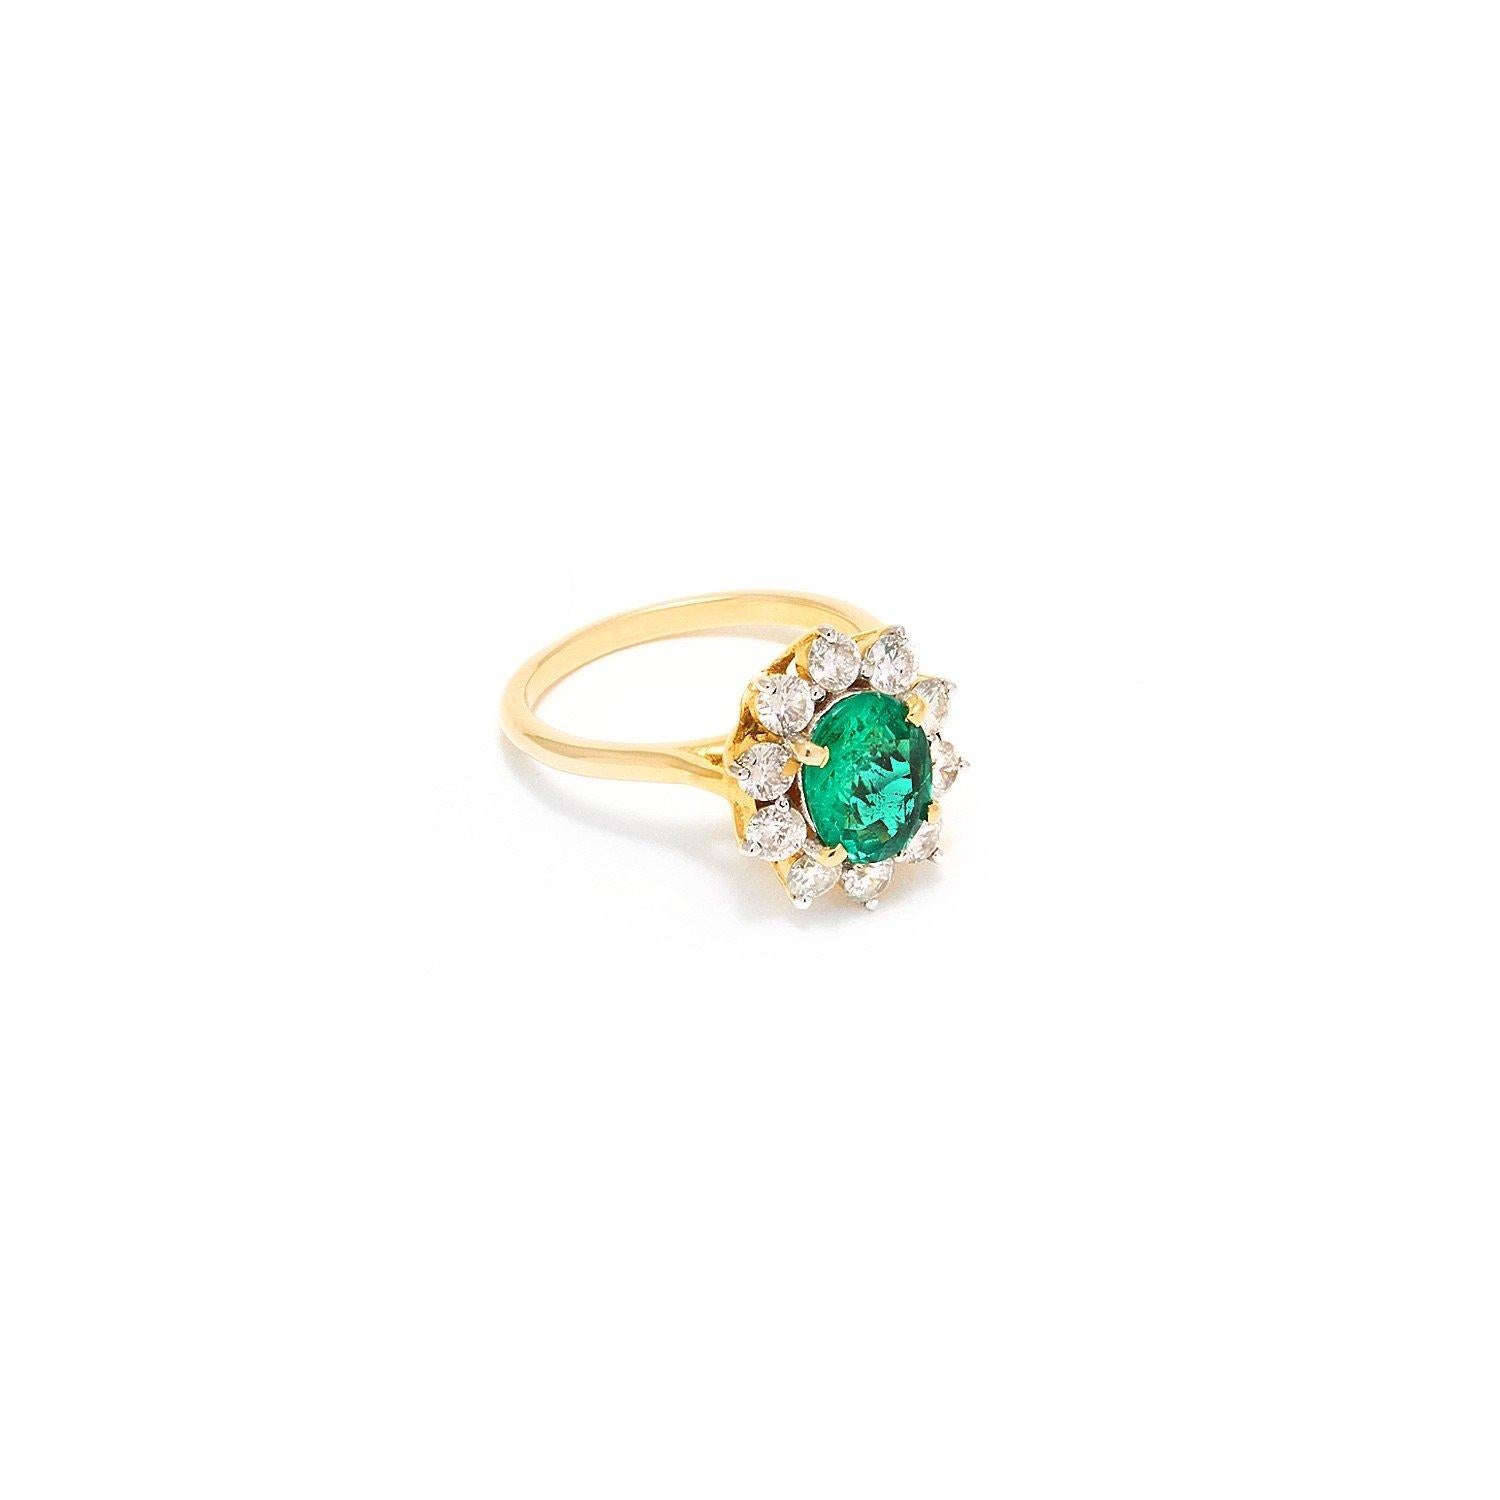 A beautiful dress ring featuring a fiery Emerald set with a cluster of fine quality Brilliant Cut White Diamonds on a Gold band.

- Zambian Emerald 1.93 Carats.
- Certified Natural with no enhancements certificate will be supplied.
- Brilliant Cut